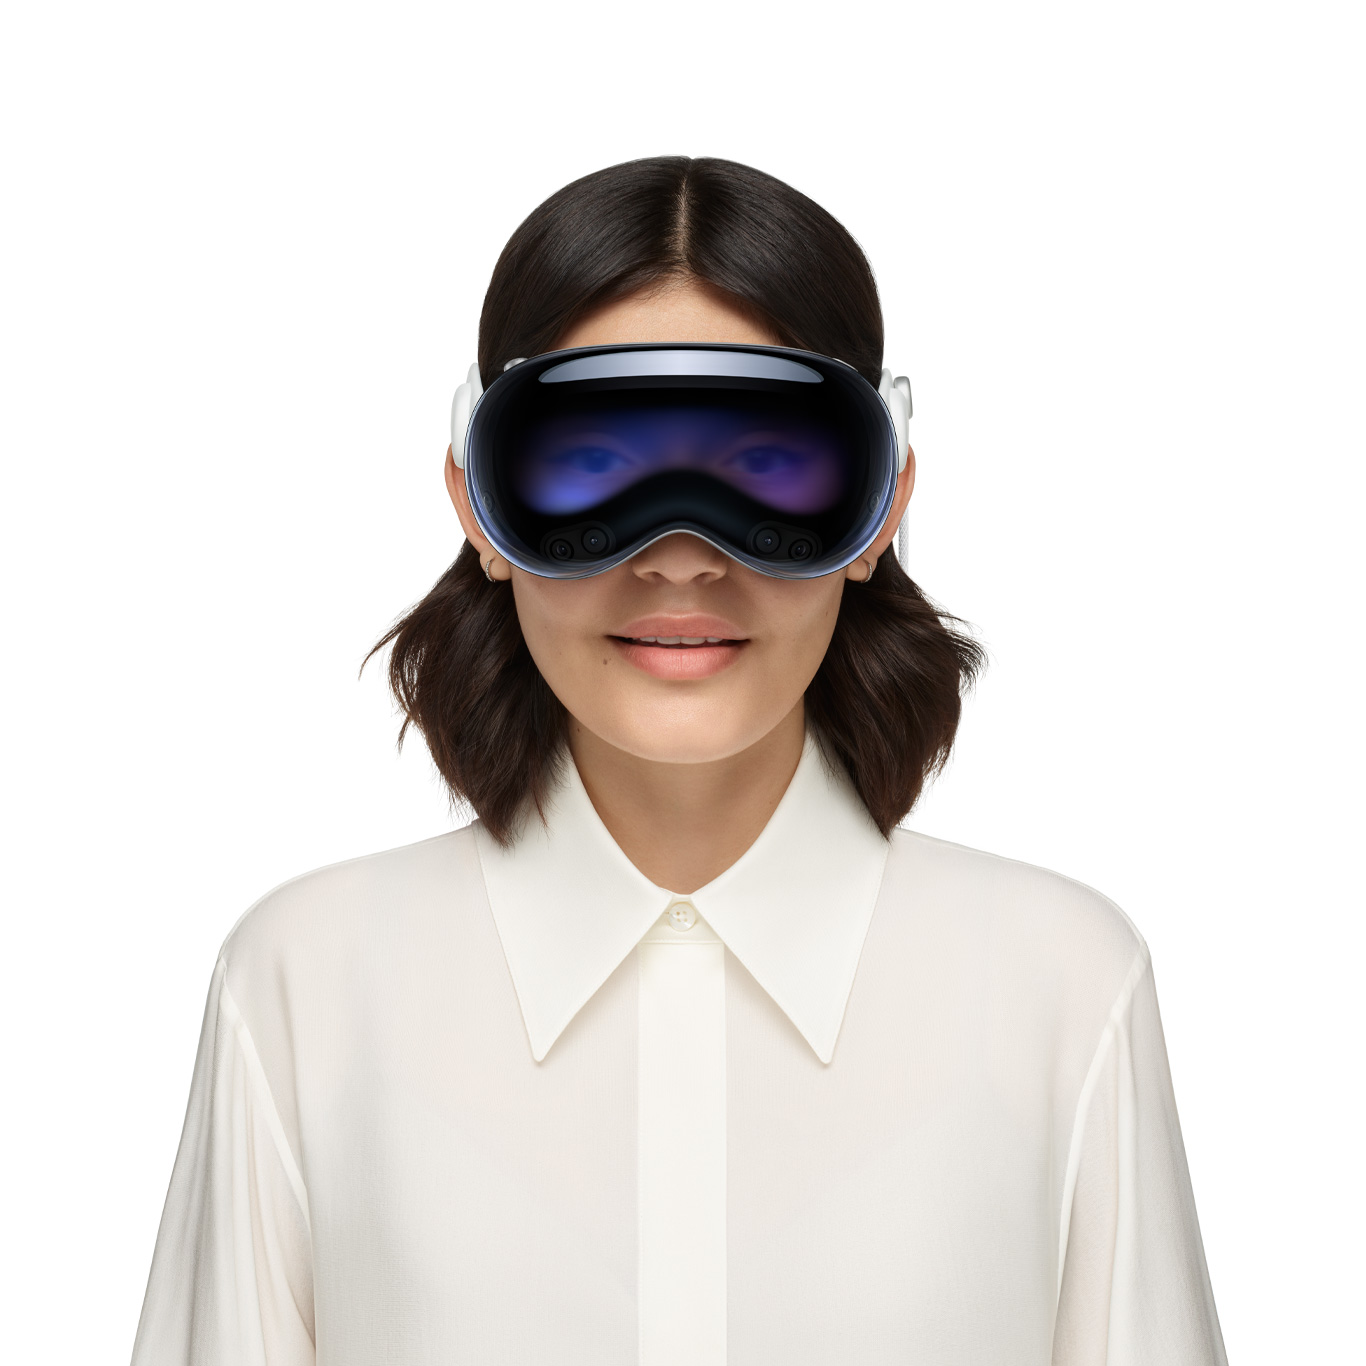 Person wearing Apple Vision Pro, with eyes revealed through an outward display